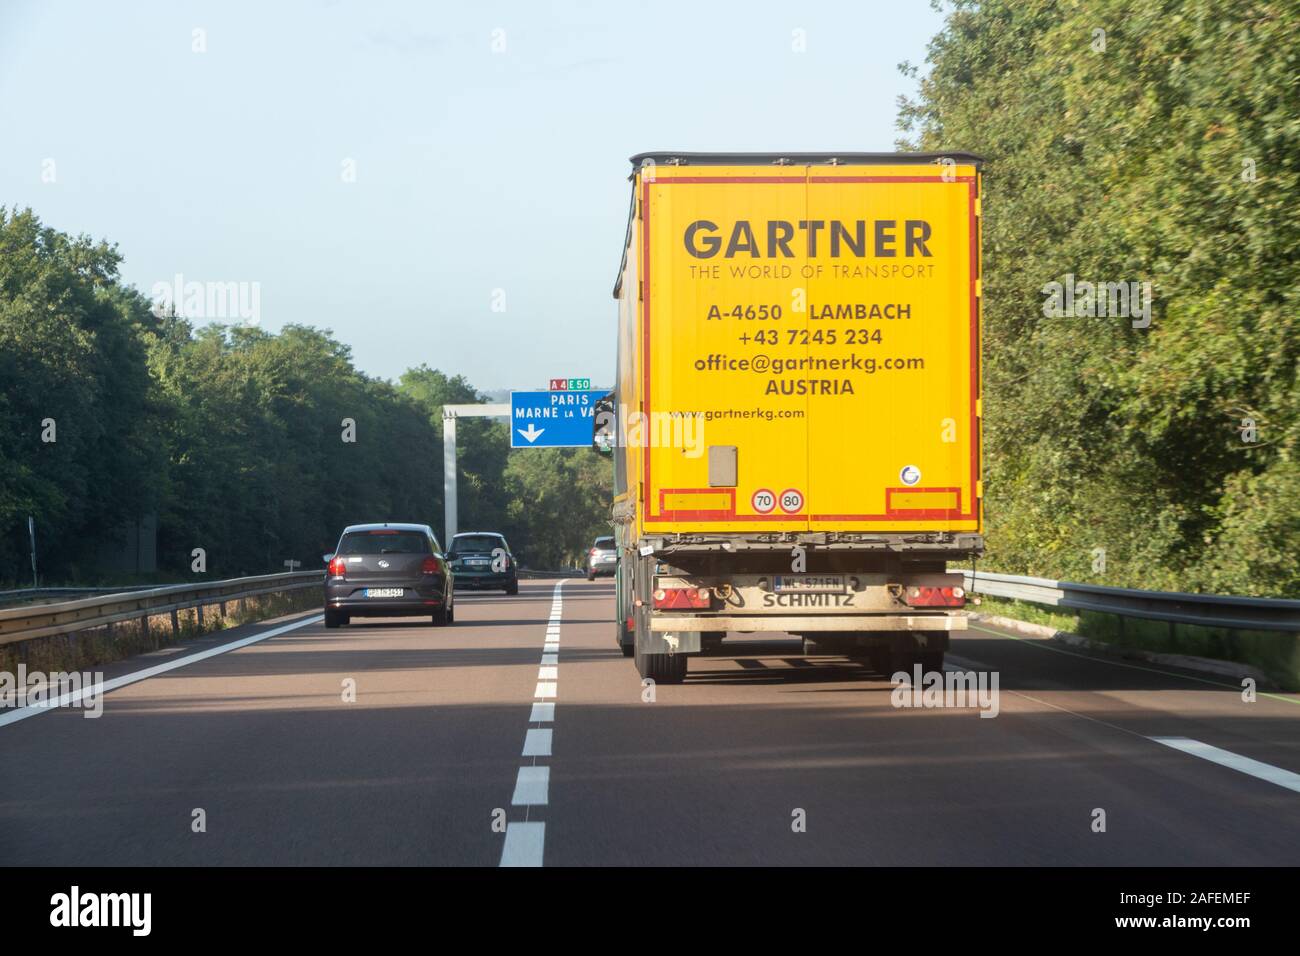 Melun – France, August 19, 2019 : Cars and Gartner truck on the highway Stock Photo